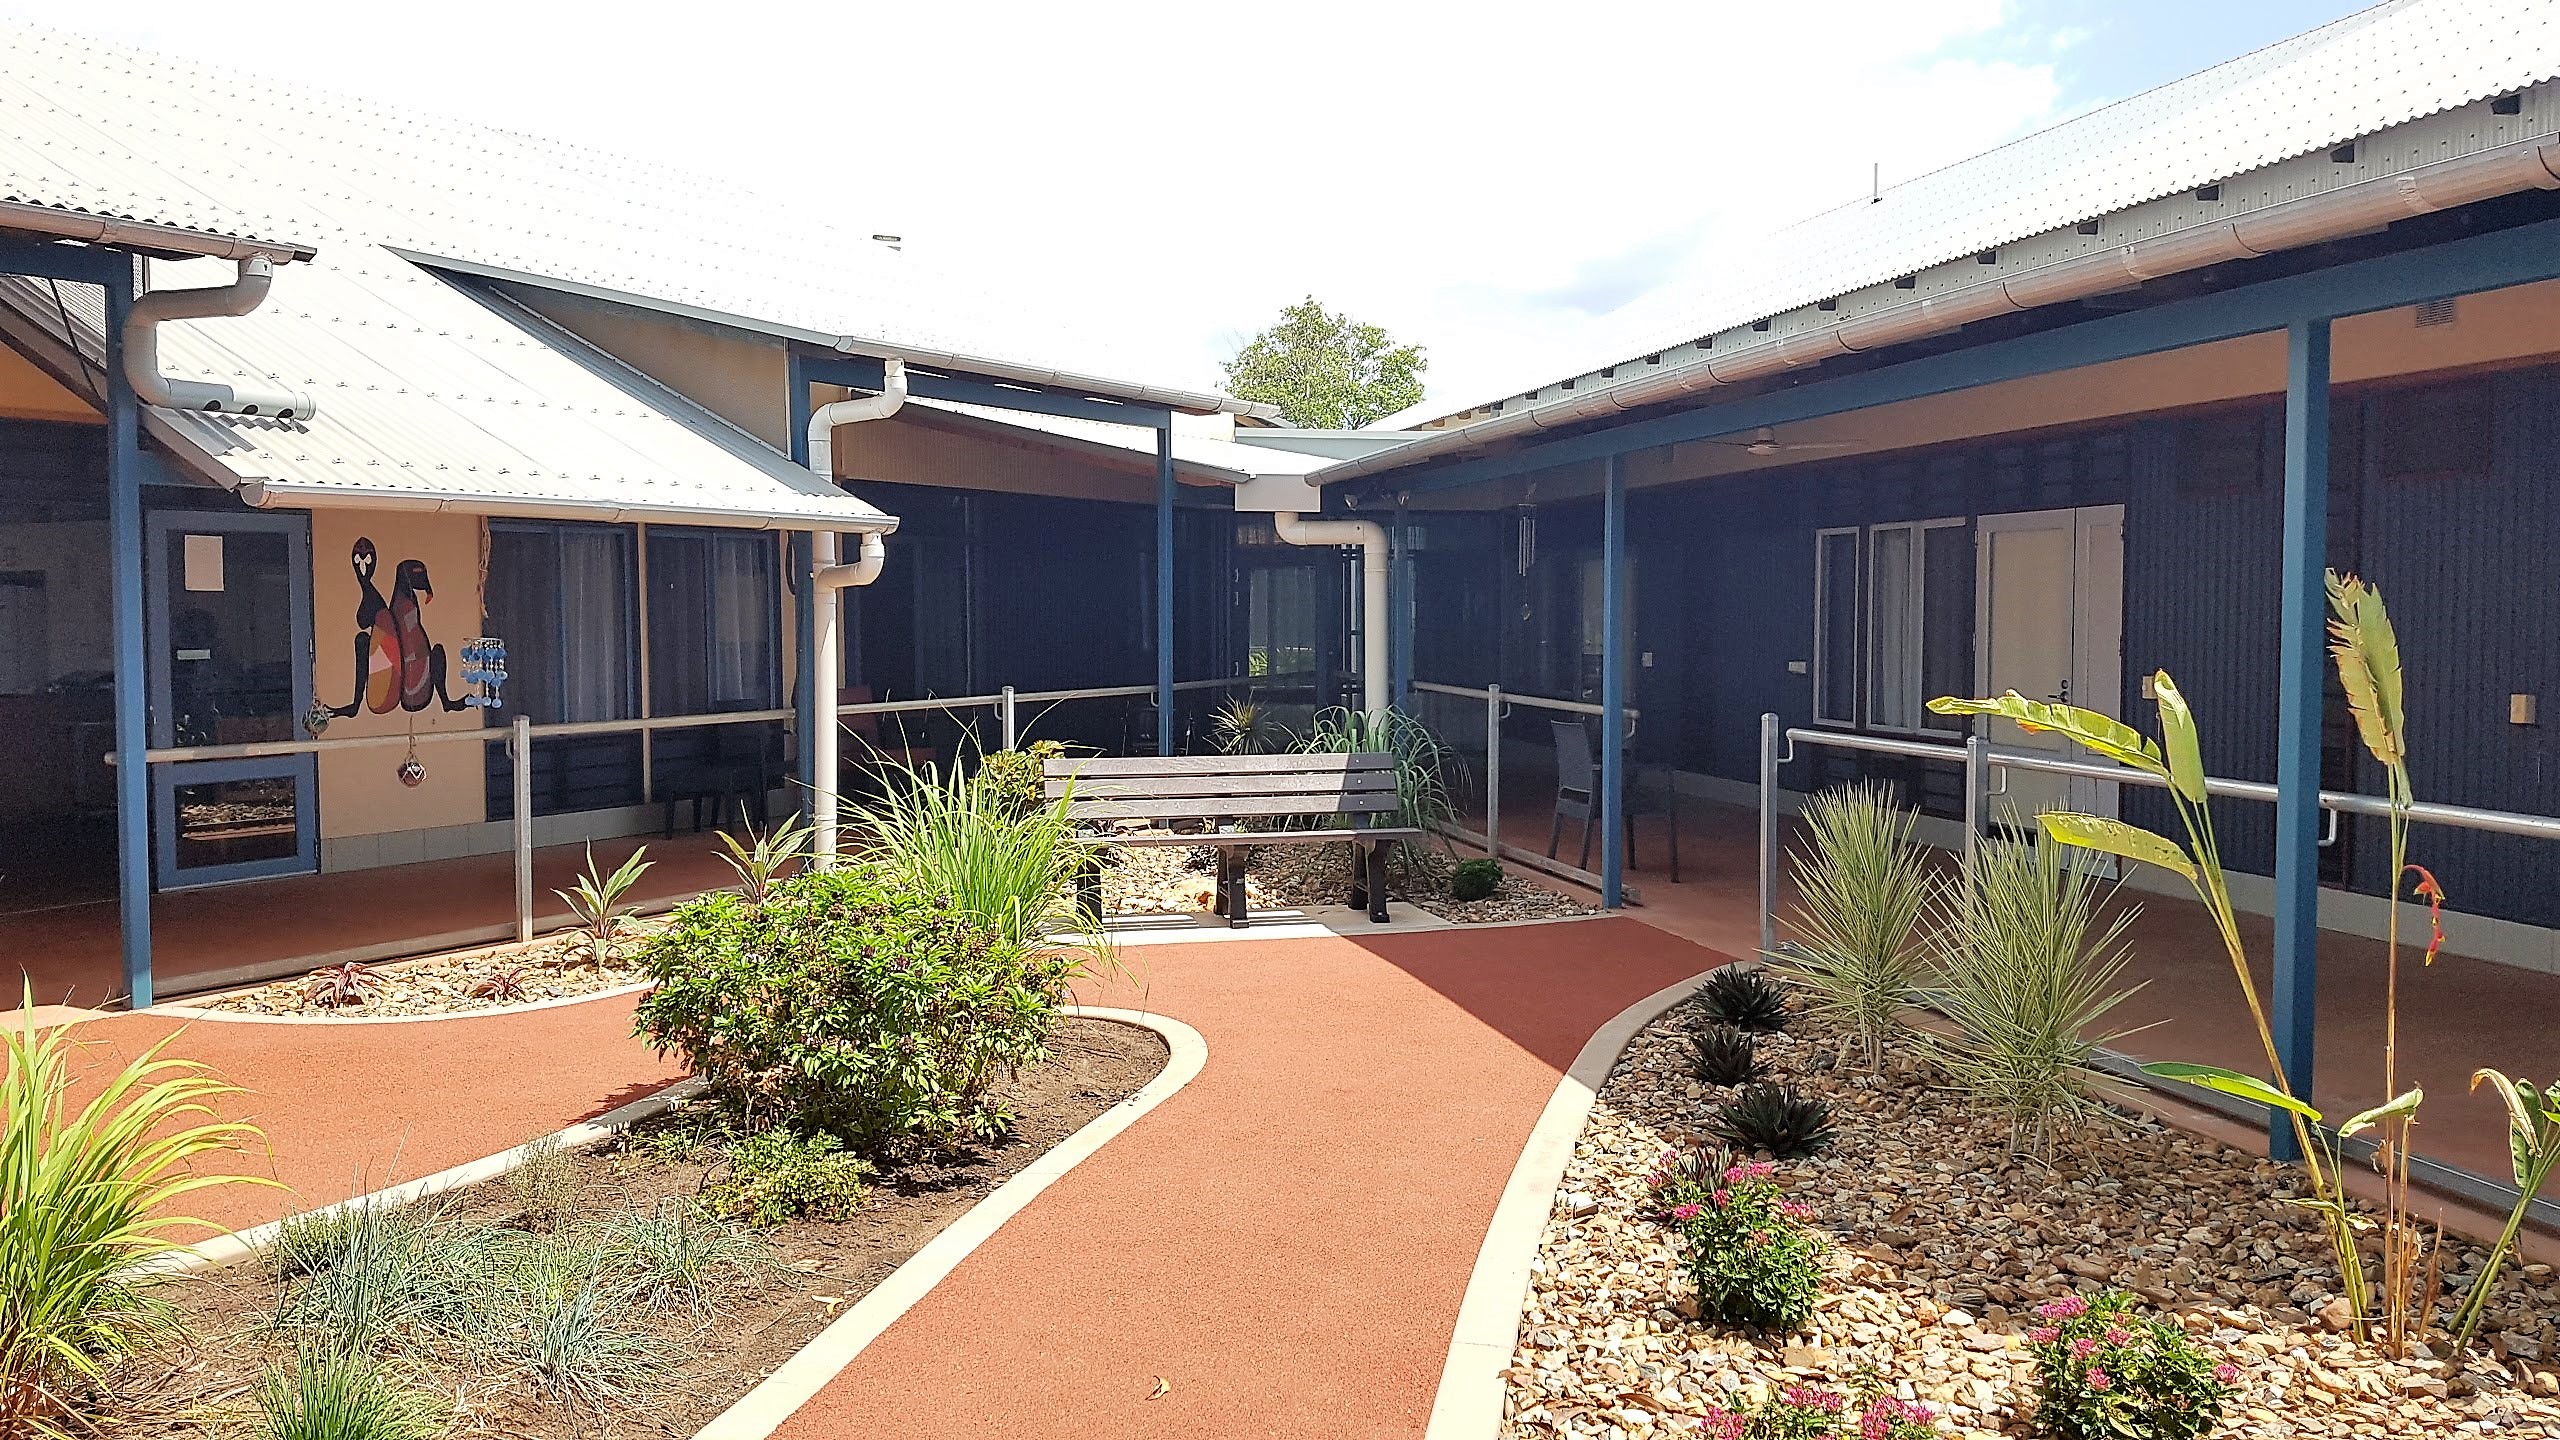 Terrace Gardens Residential Aged Care Facility Palmerston Darwin